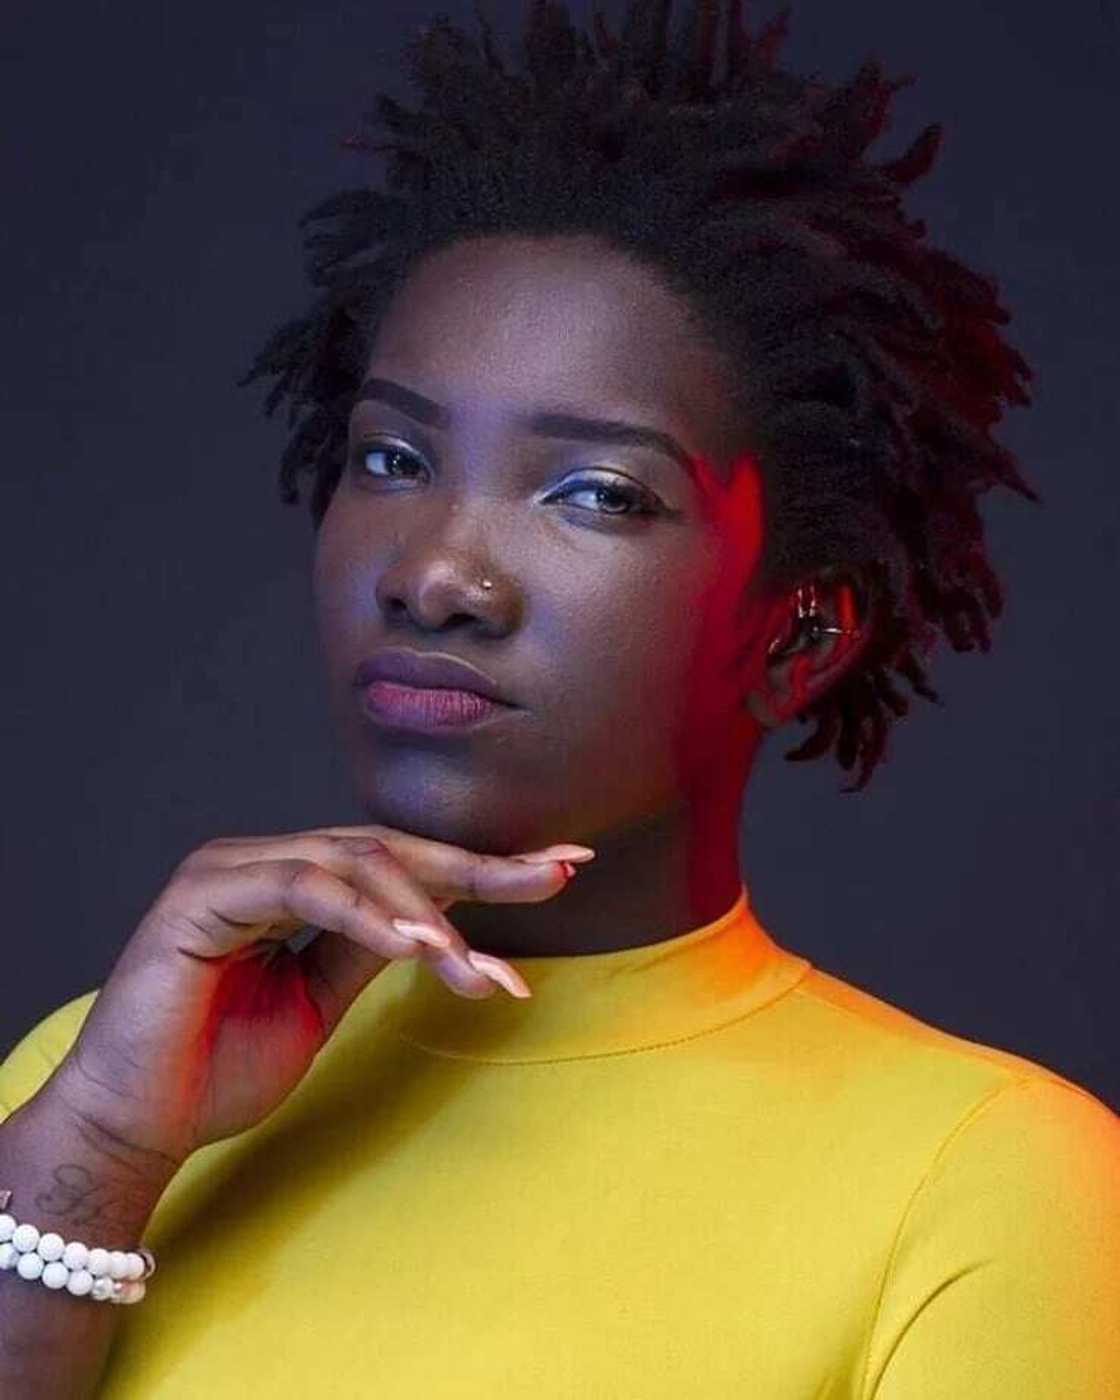 Ebony goes ‘crazy’ over 1 million views for 'Maame Hwe' video